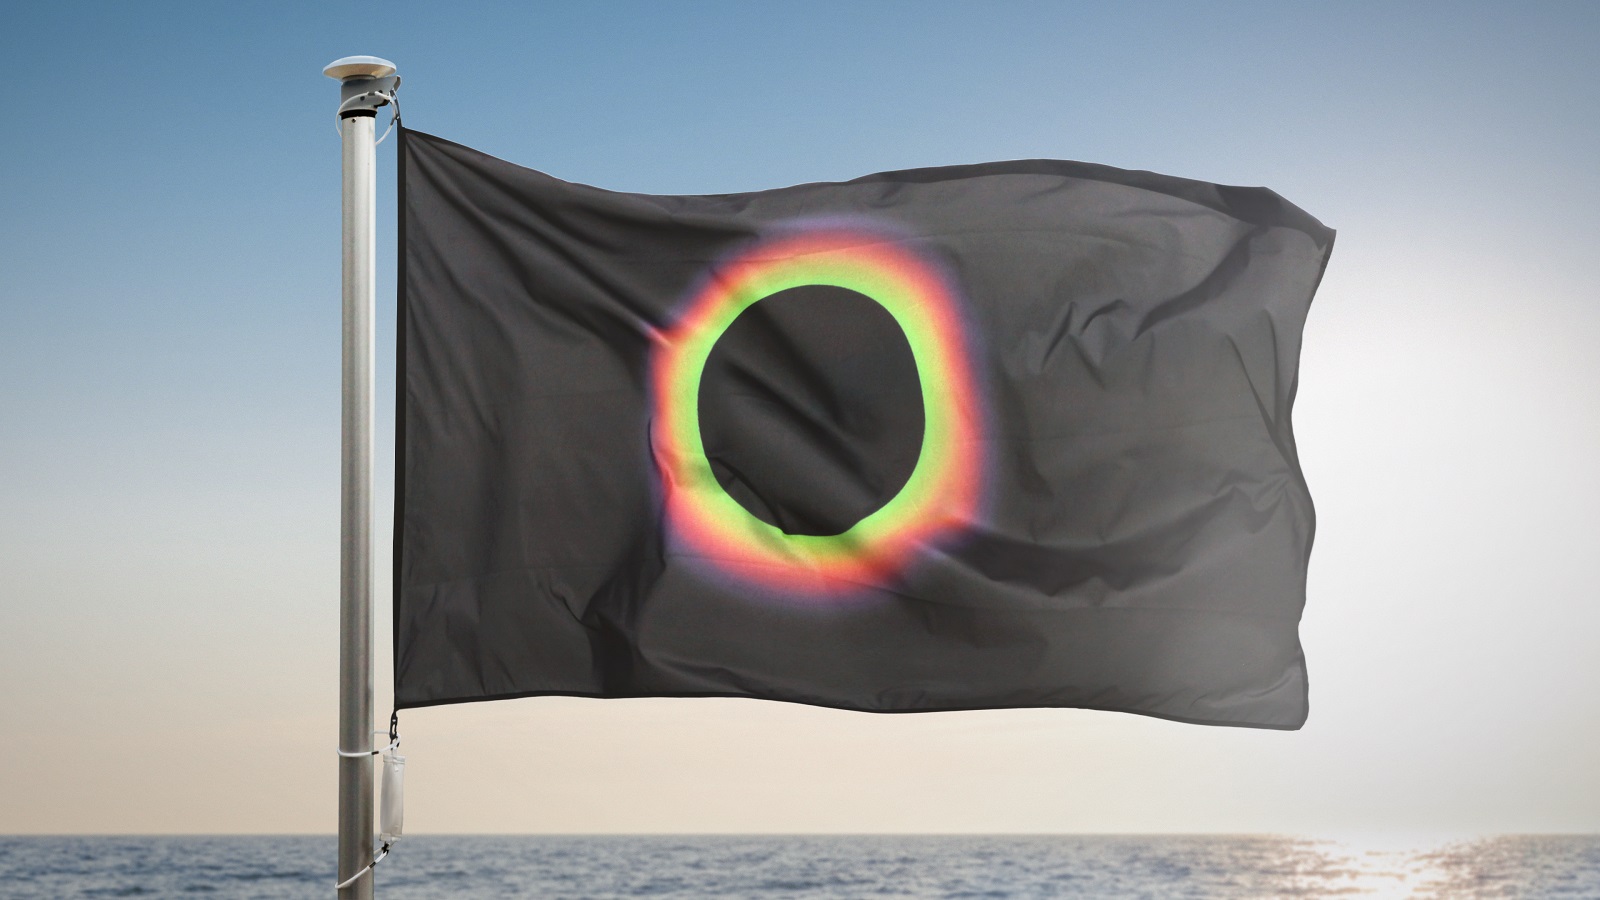 The German Cancer Aid Flags Up Its Concerns About Skin Cancer by Hoisting a Black Flag